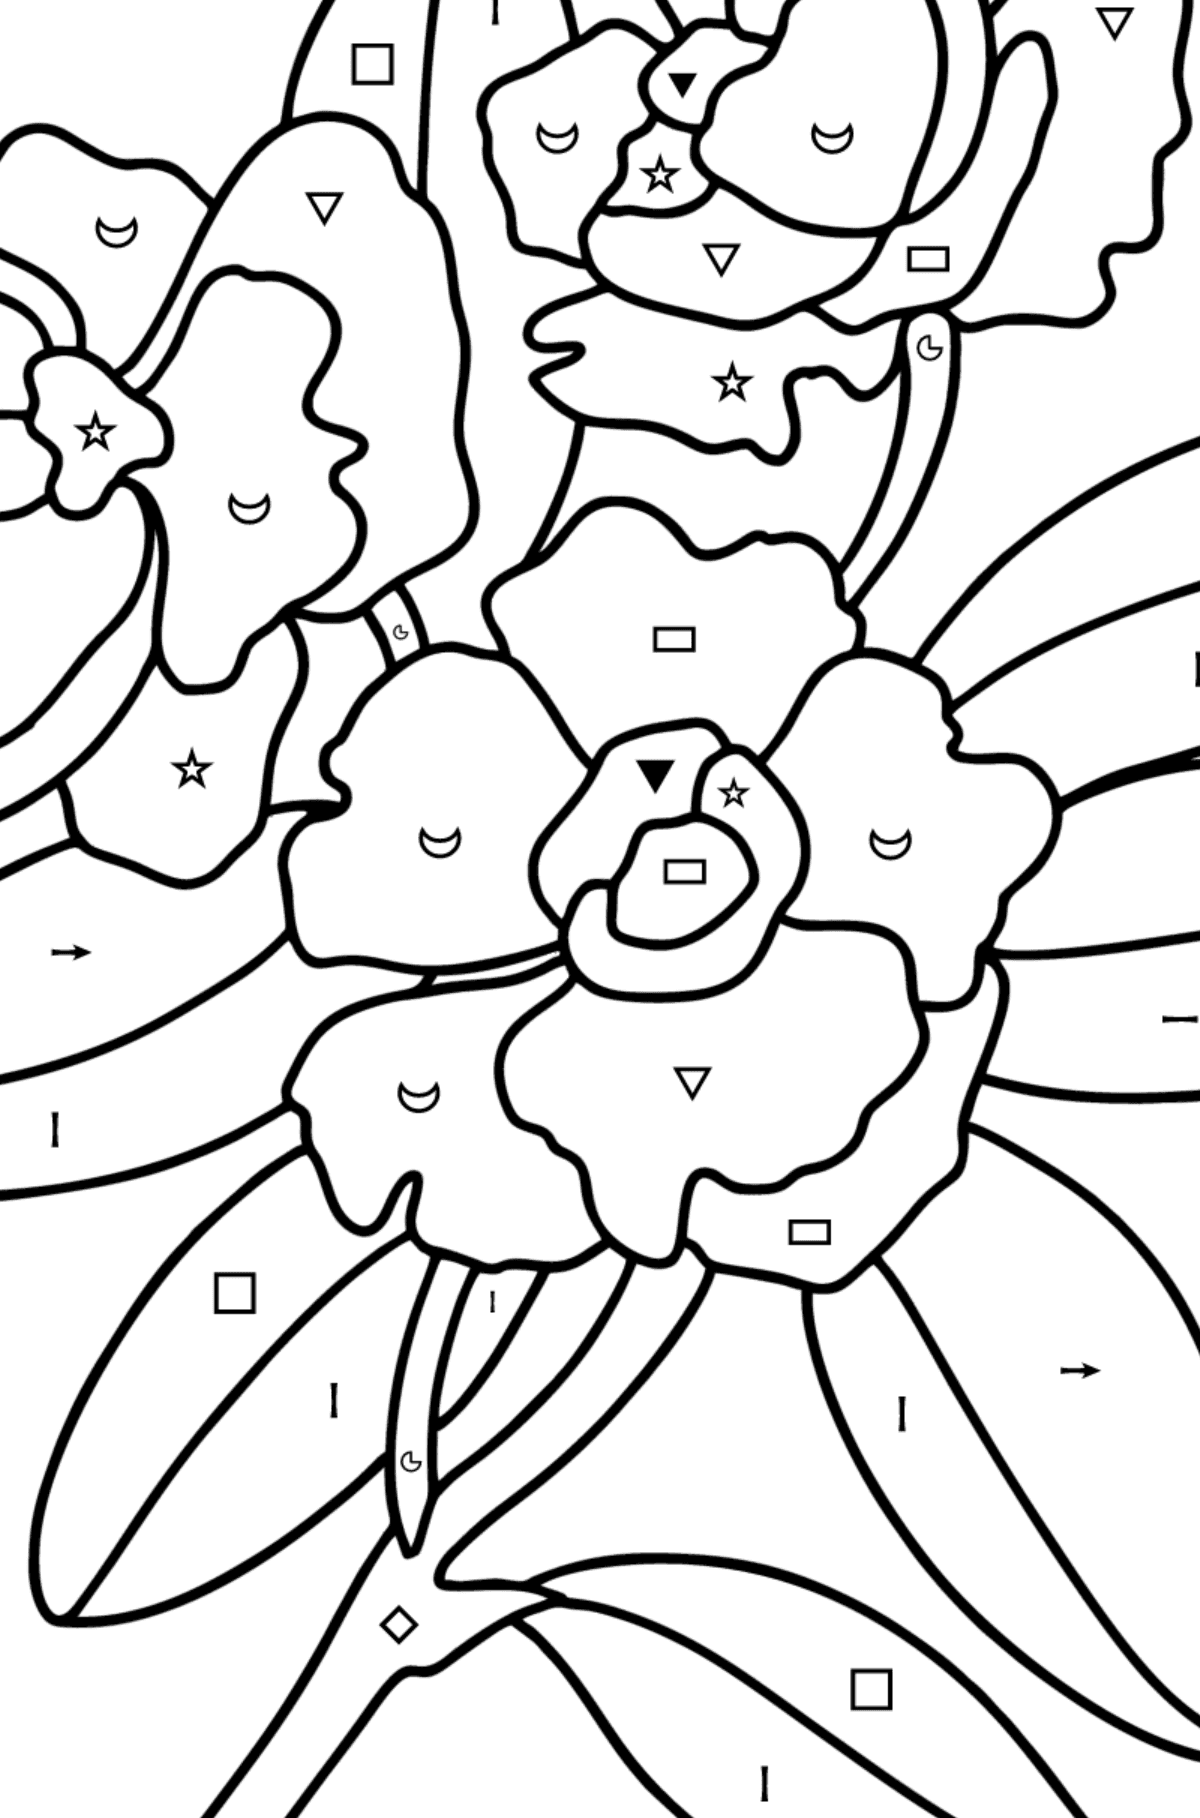 Gardenia coloring page - Coloring by Symbols and Geometric Shapes for Kids